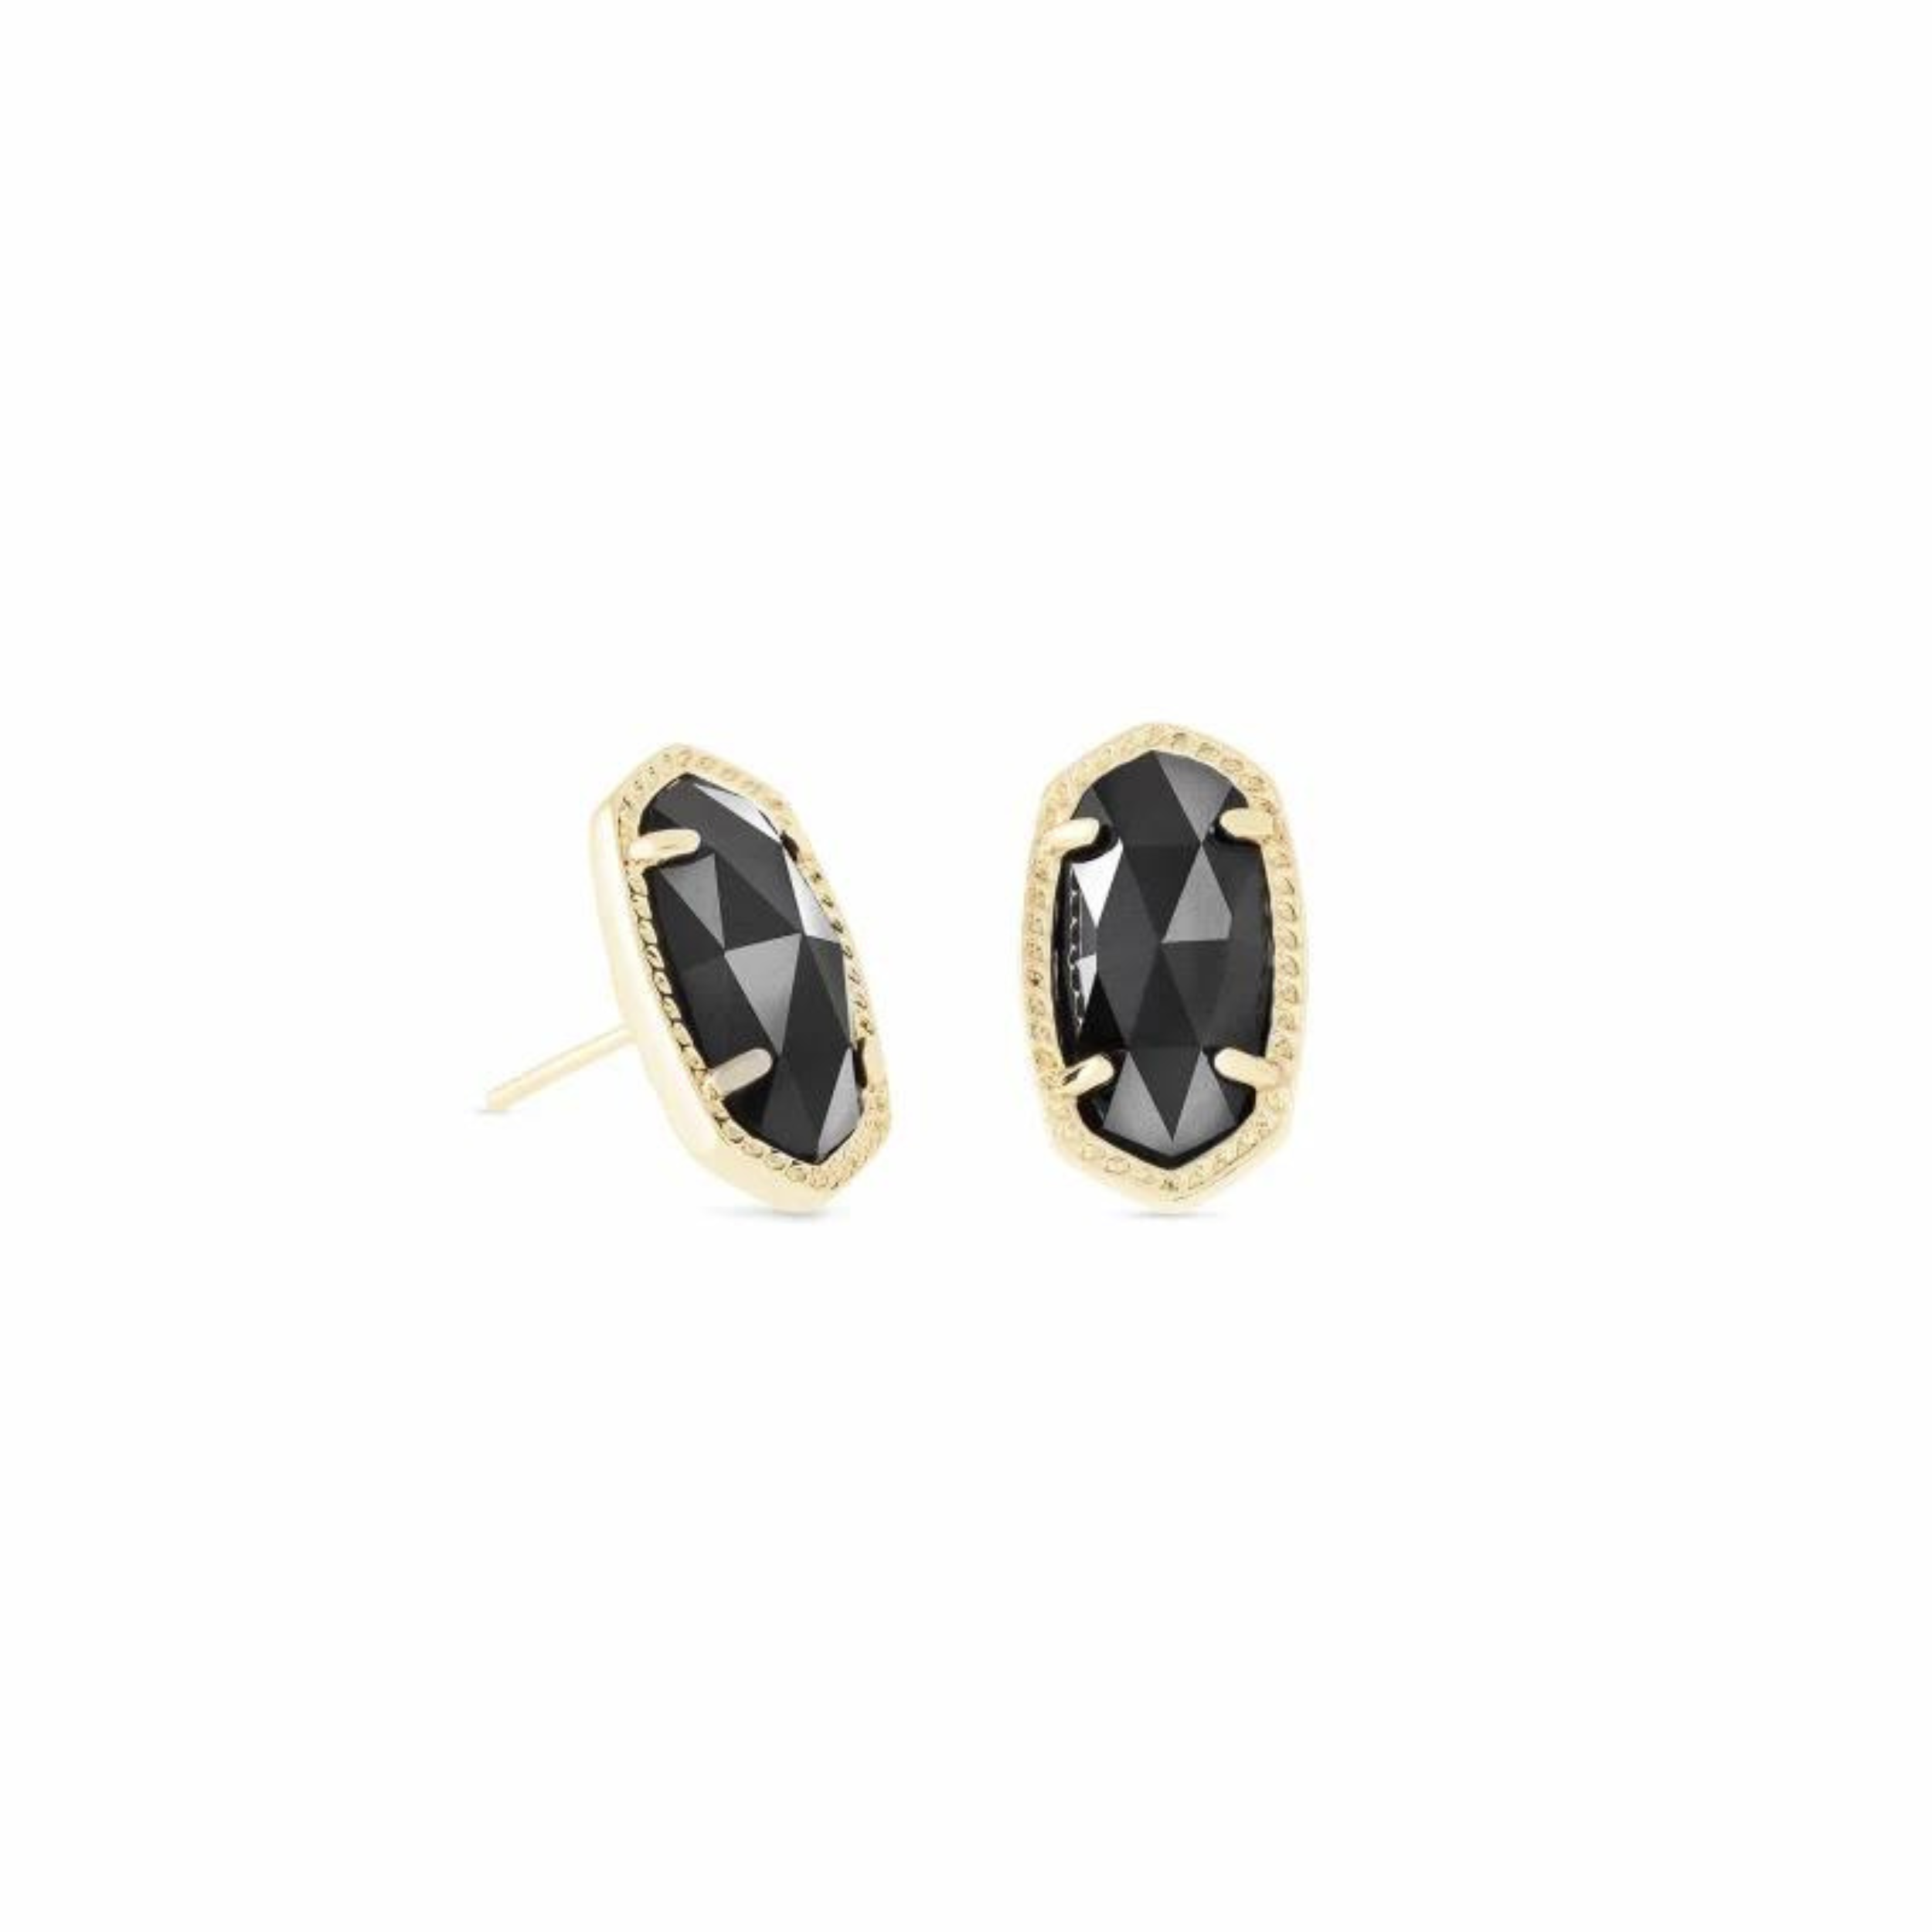 Gold stud earrings with black stones, pictured on a white background.